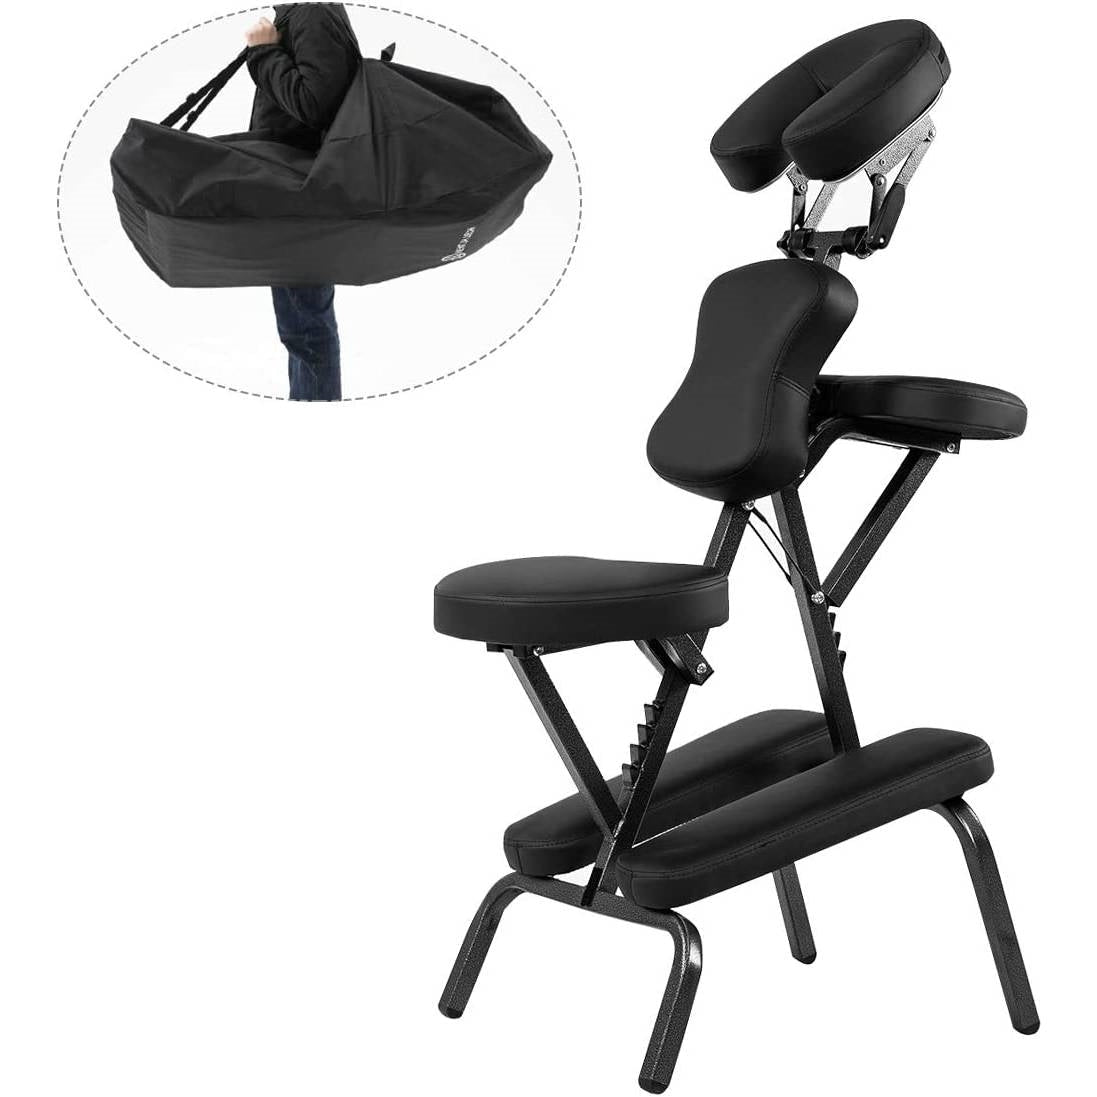 Accents > Massage Tables - Black Portable Massage Tattoo Chair With Carrying Bag